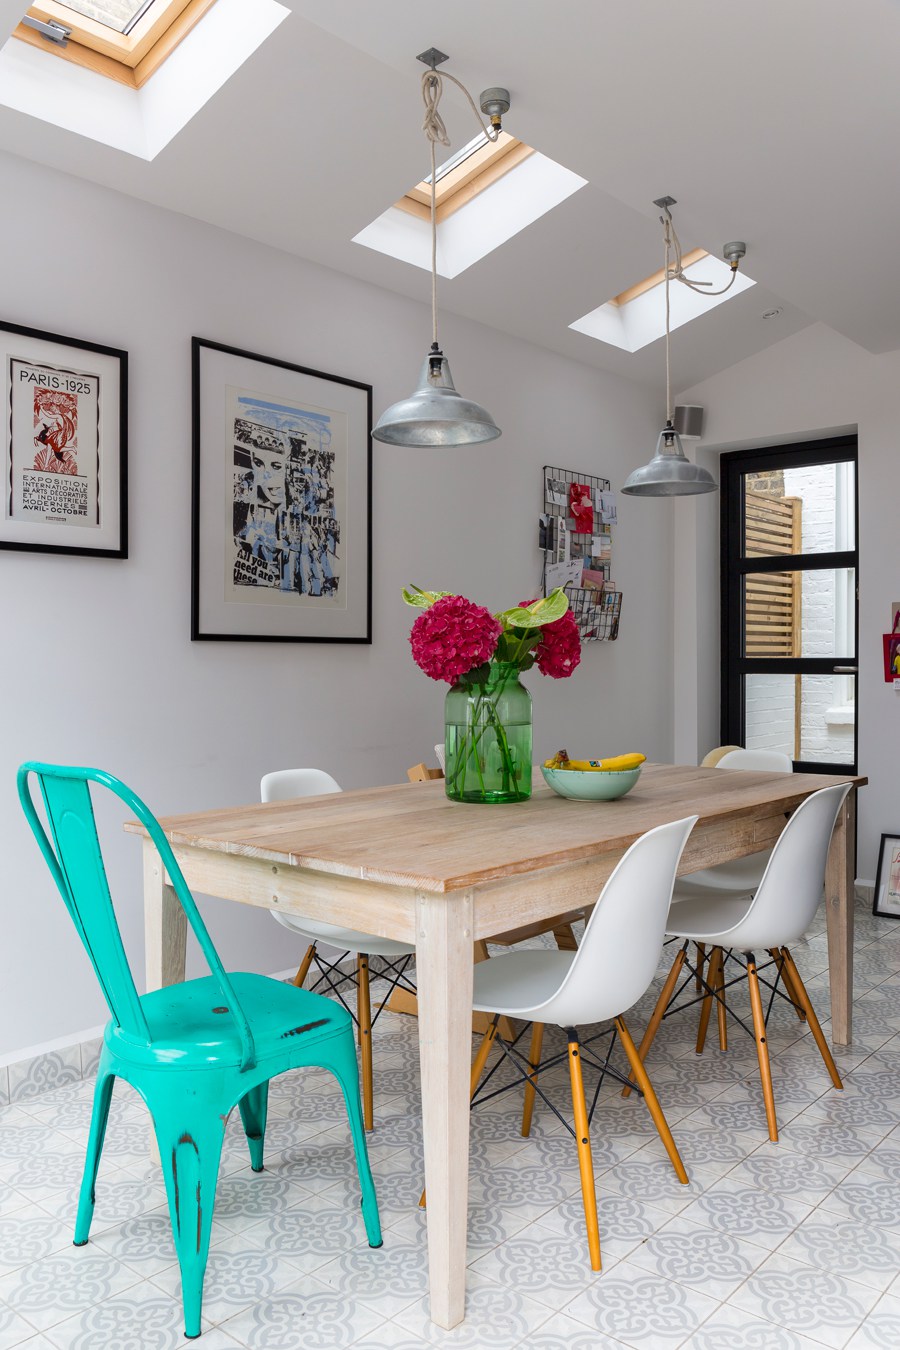 Kitchen & Dining Room Lighting | Factorylux for London Terrace